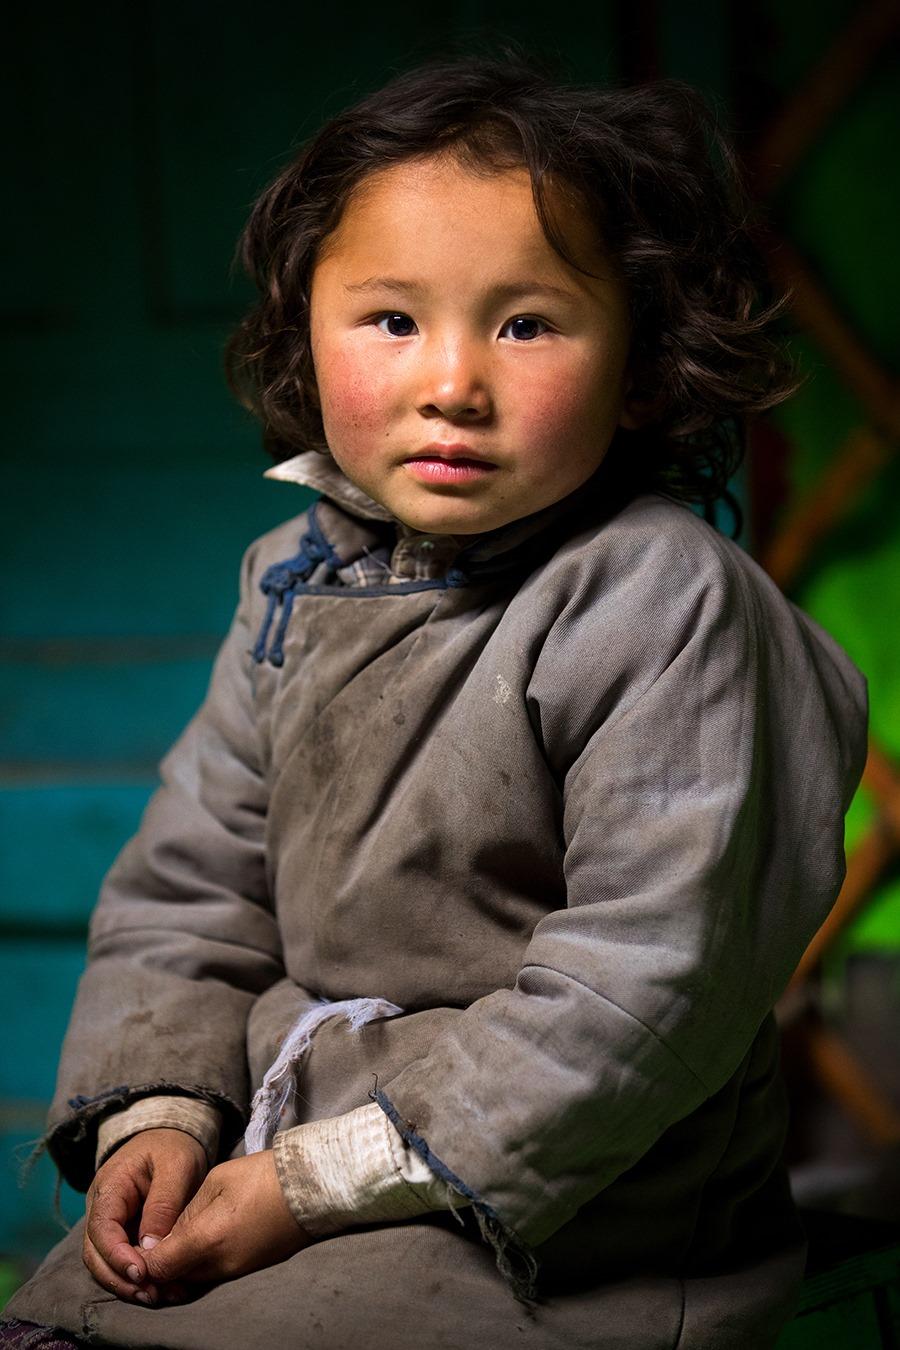 A portrait of a beautiful little Zakhchin girl "literally in the middle of nowhere in western Mongolia" (© <a href="https://www.facebook.com/xperimenter">Alexander Khimushin</a> / The World In Faces)